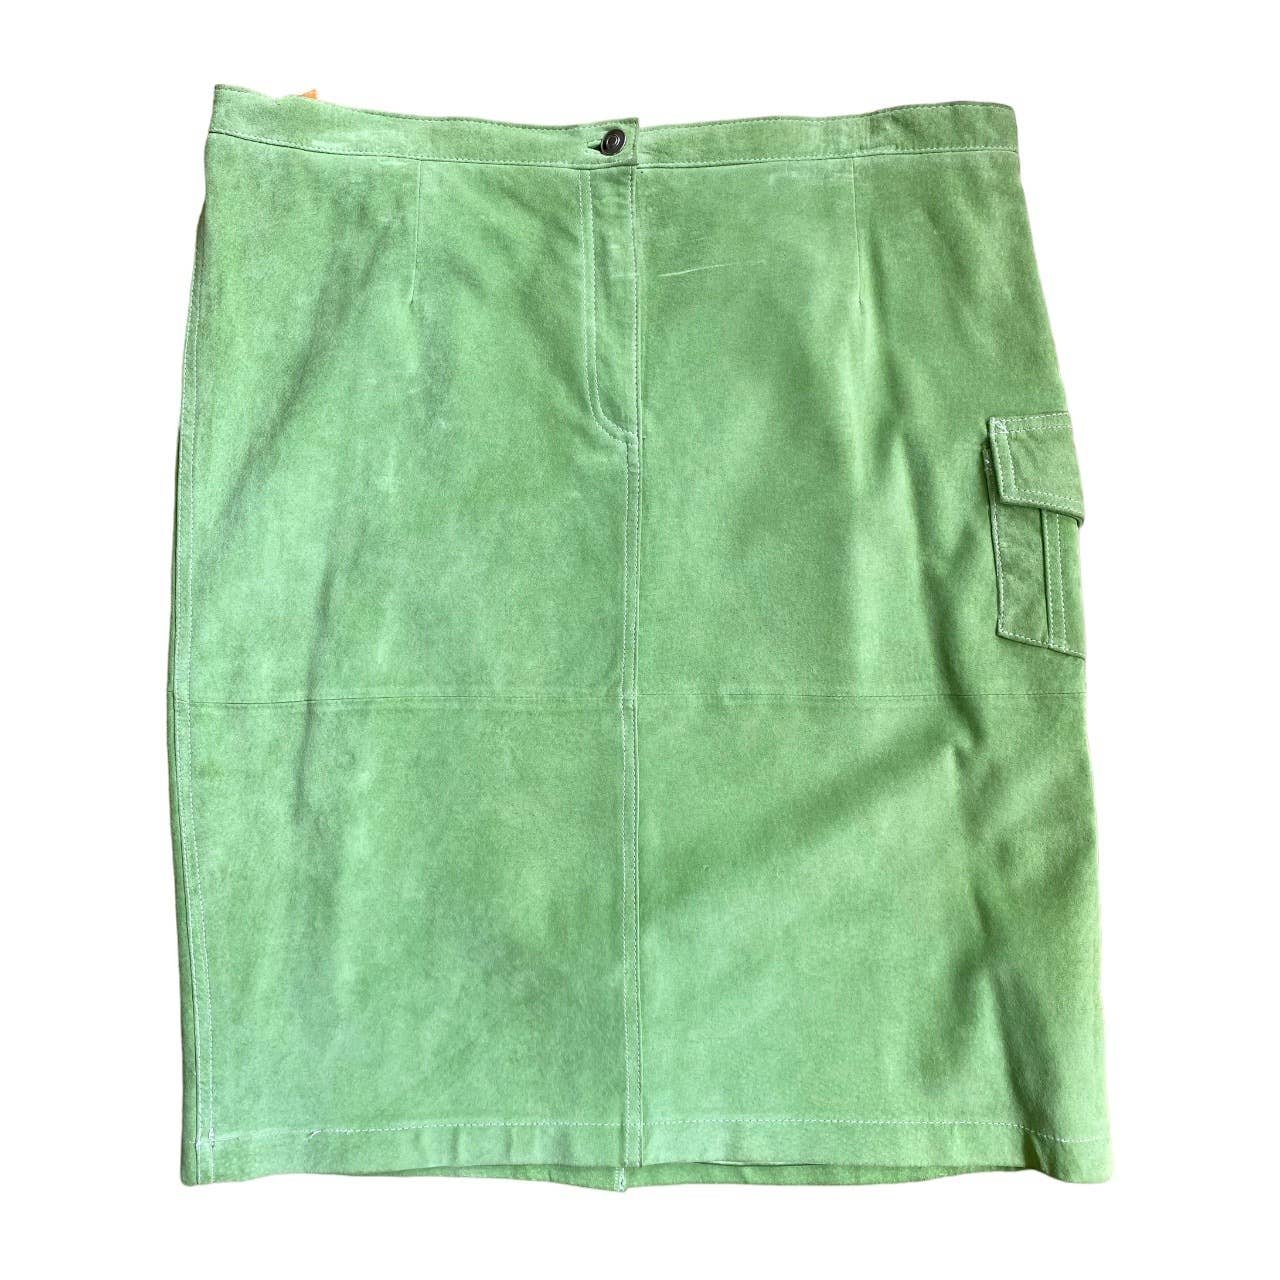 save up to 70% Vintage Green Suede Leather Skirt, Terry